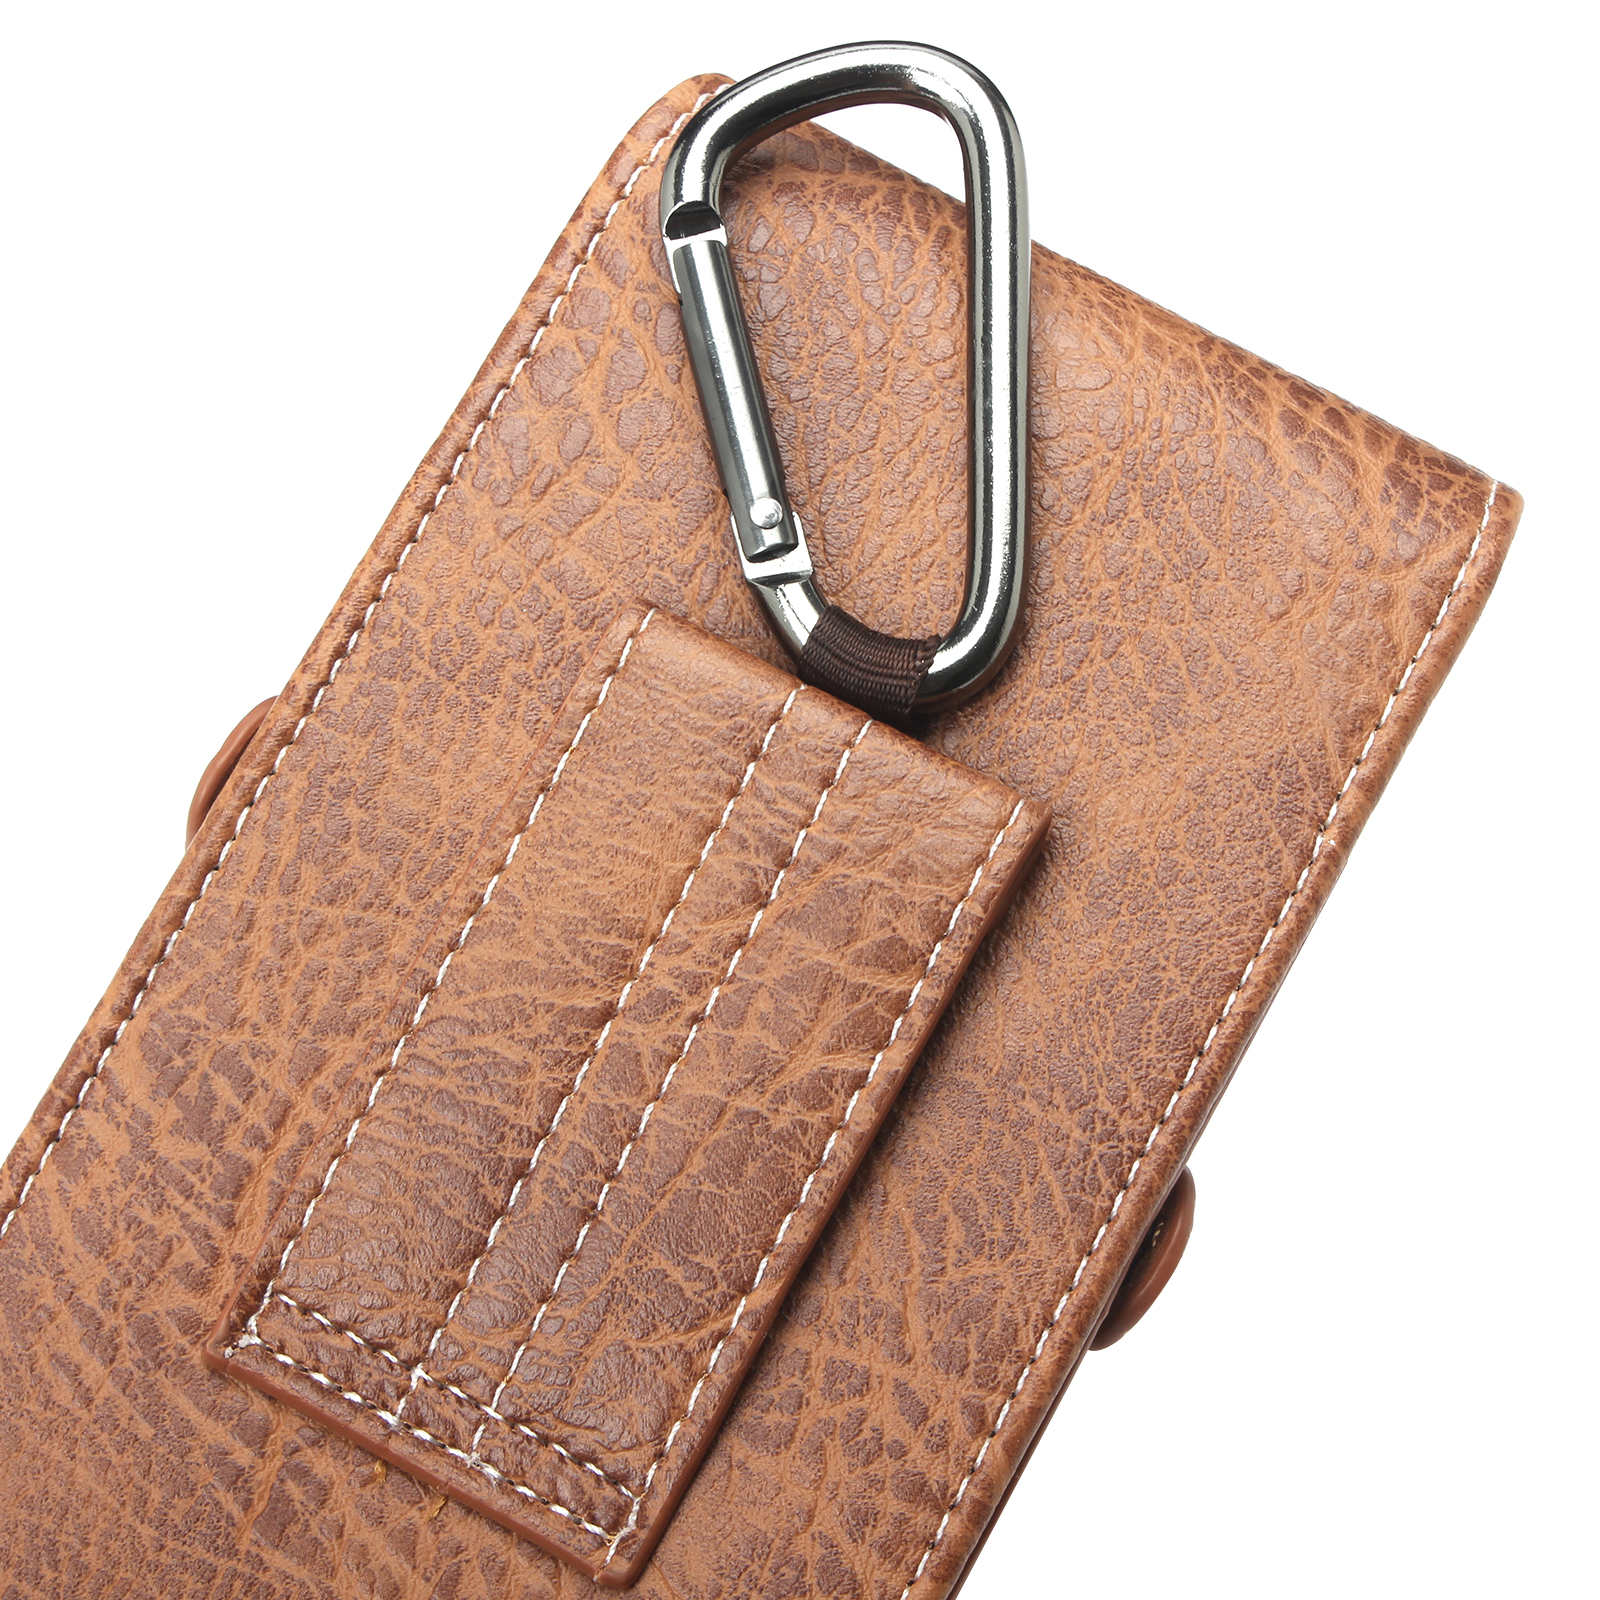 Bakeey-Casual-Vintage-Bussiness-64-inch-Vertical-Multi-Pocket-Multi-Card-Slot-PU-Leather-Mobile-Phon-1692765-11